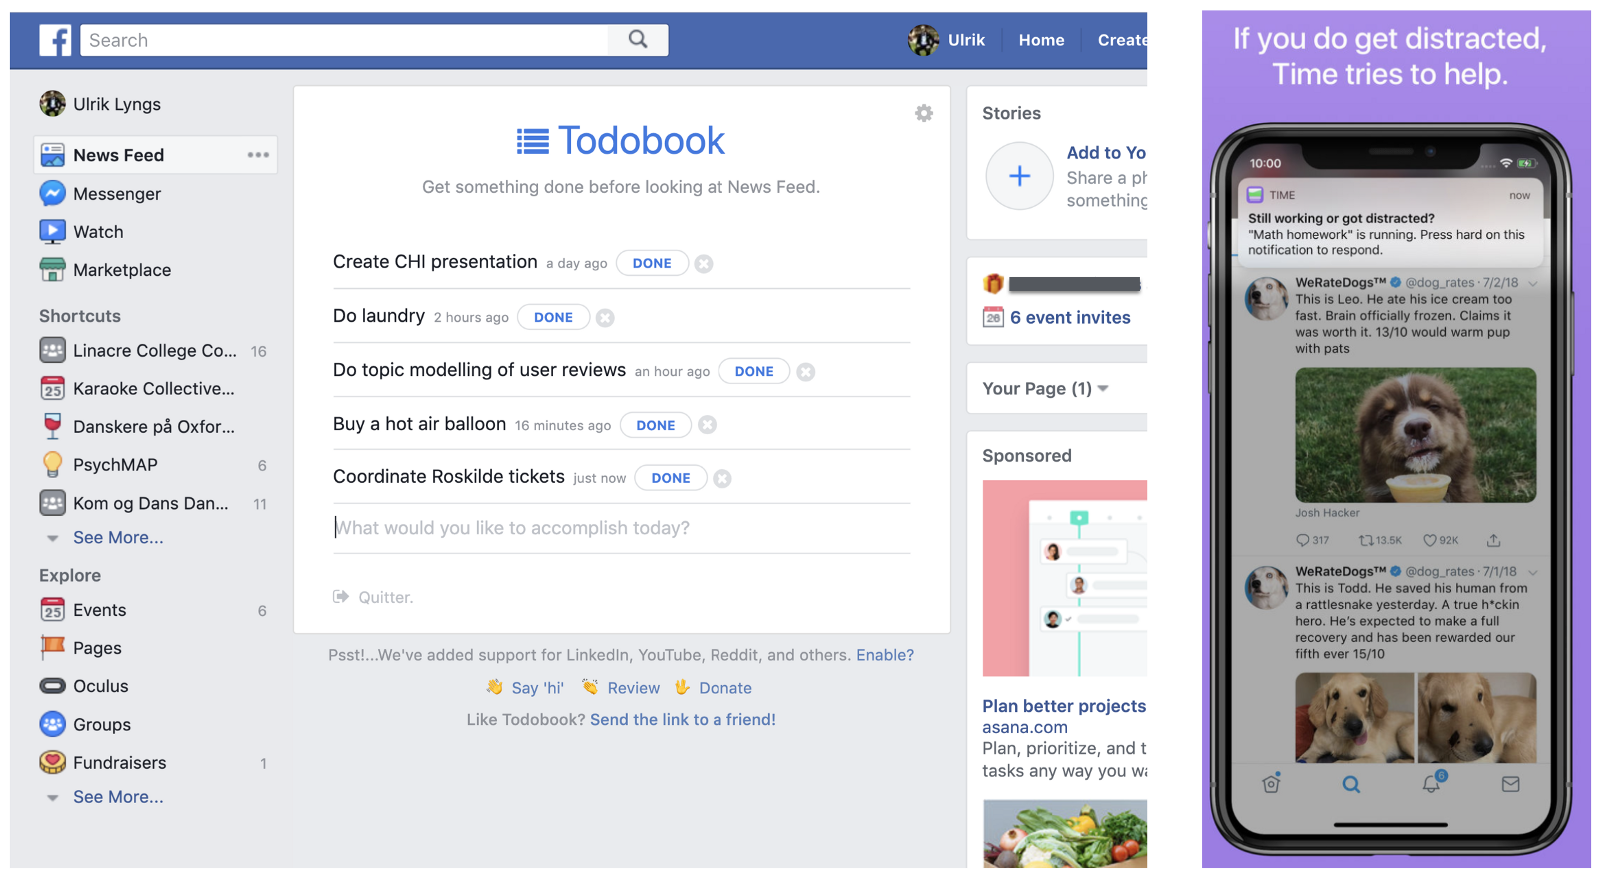 [Todobook](https://chrome.google.com/webstore/detail/todobook/ihbejplhkeifejcpijadinaicidddbde?hl=en) (left) replaces Facebook’s newsfeed with a todo-list; the iOS app [Time](https://itunes.apple.com/gb/app/time-defeat-distraction/id1313017655?mt=8&ign-mpt=uo%3D4) (right) is a todo-list which provides continual task reminders if the user leaves the app.